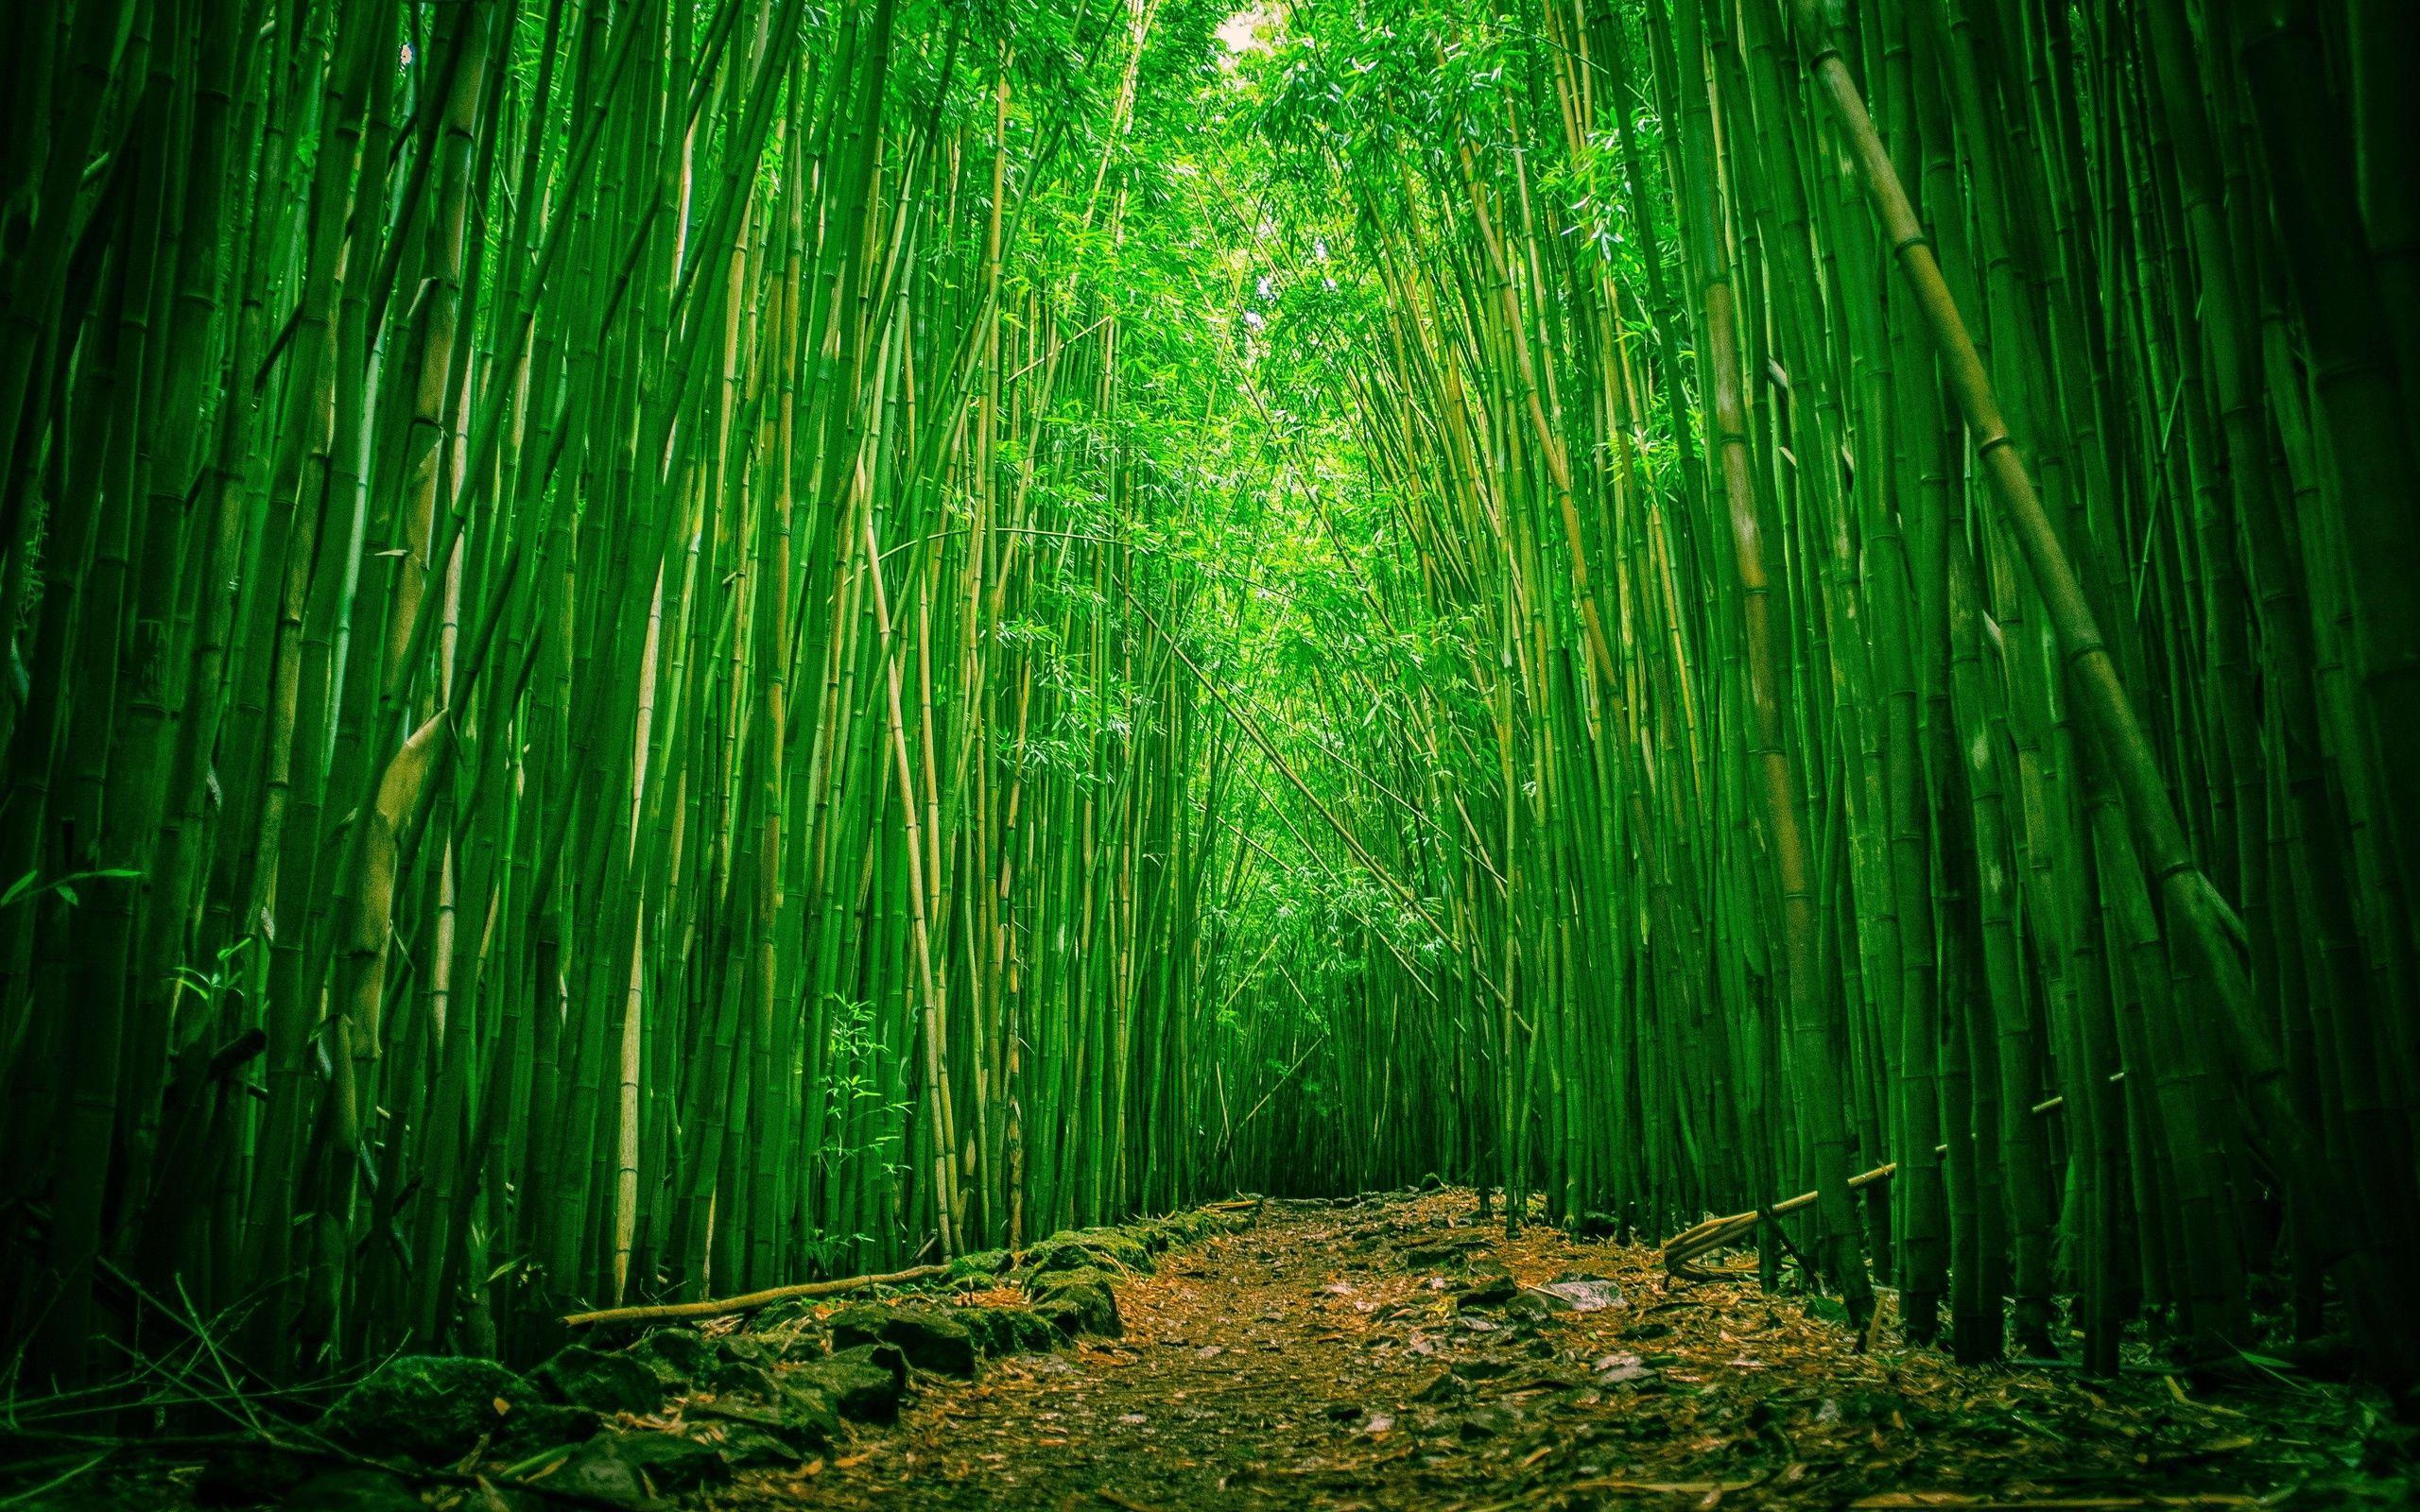 bamboo paper download windows 10